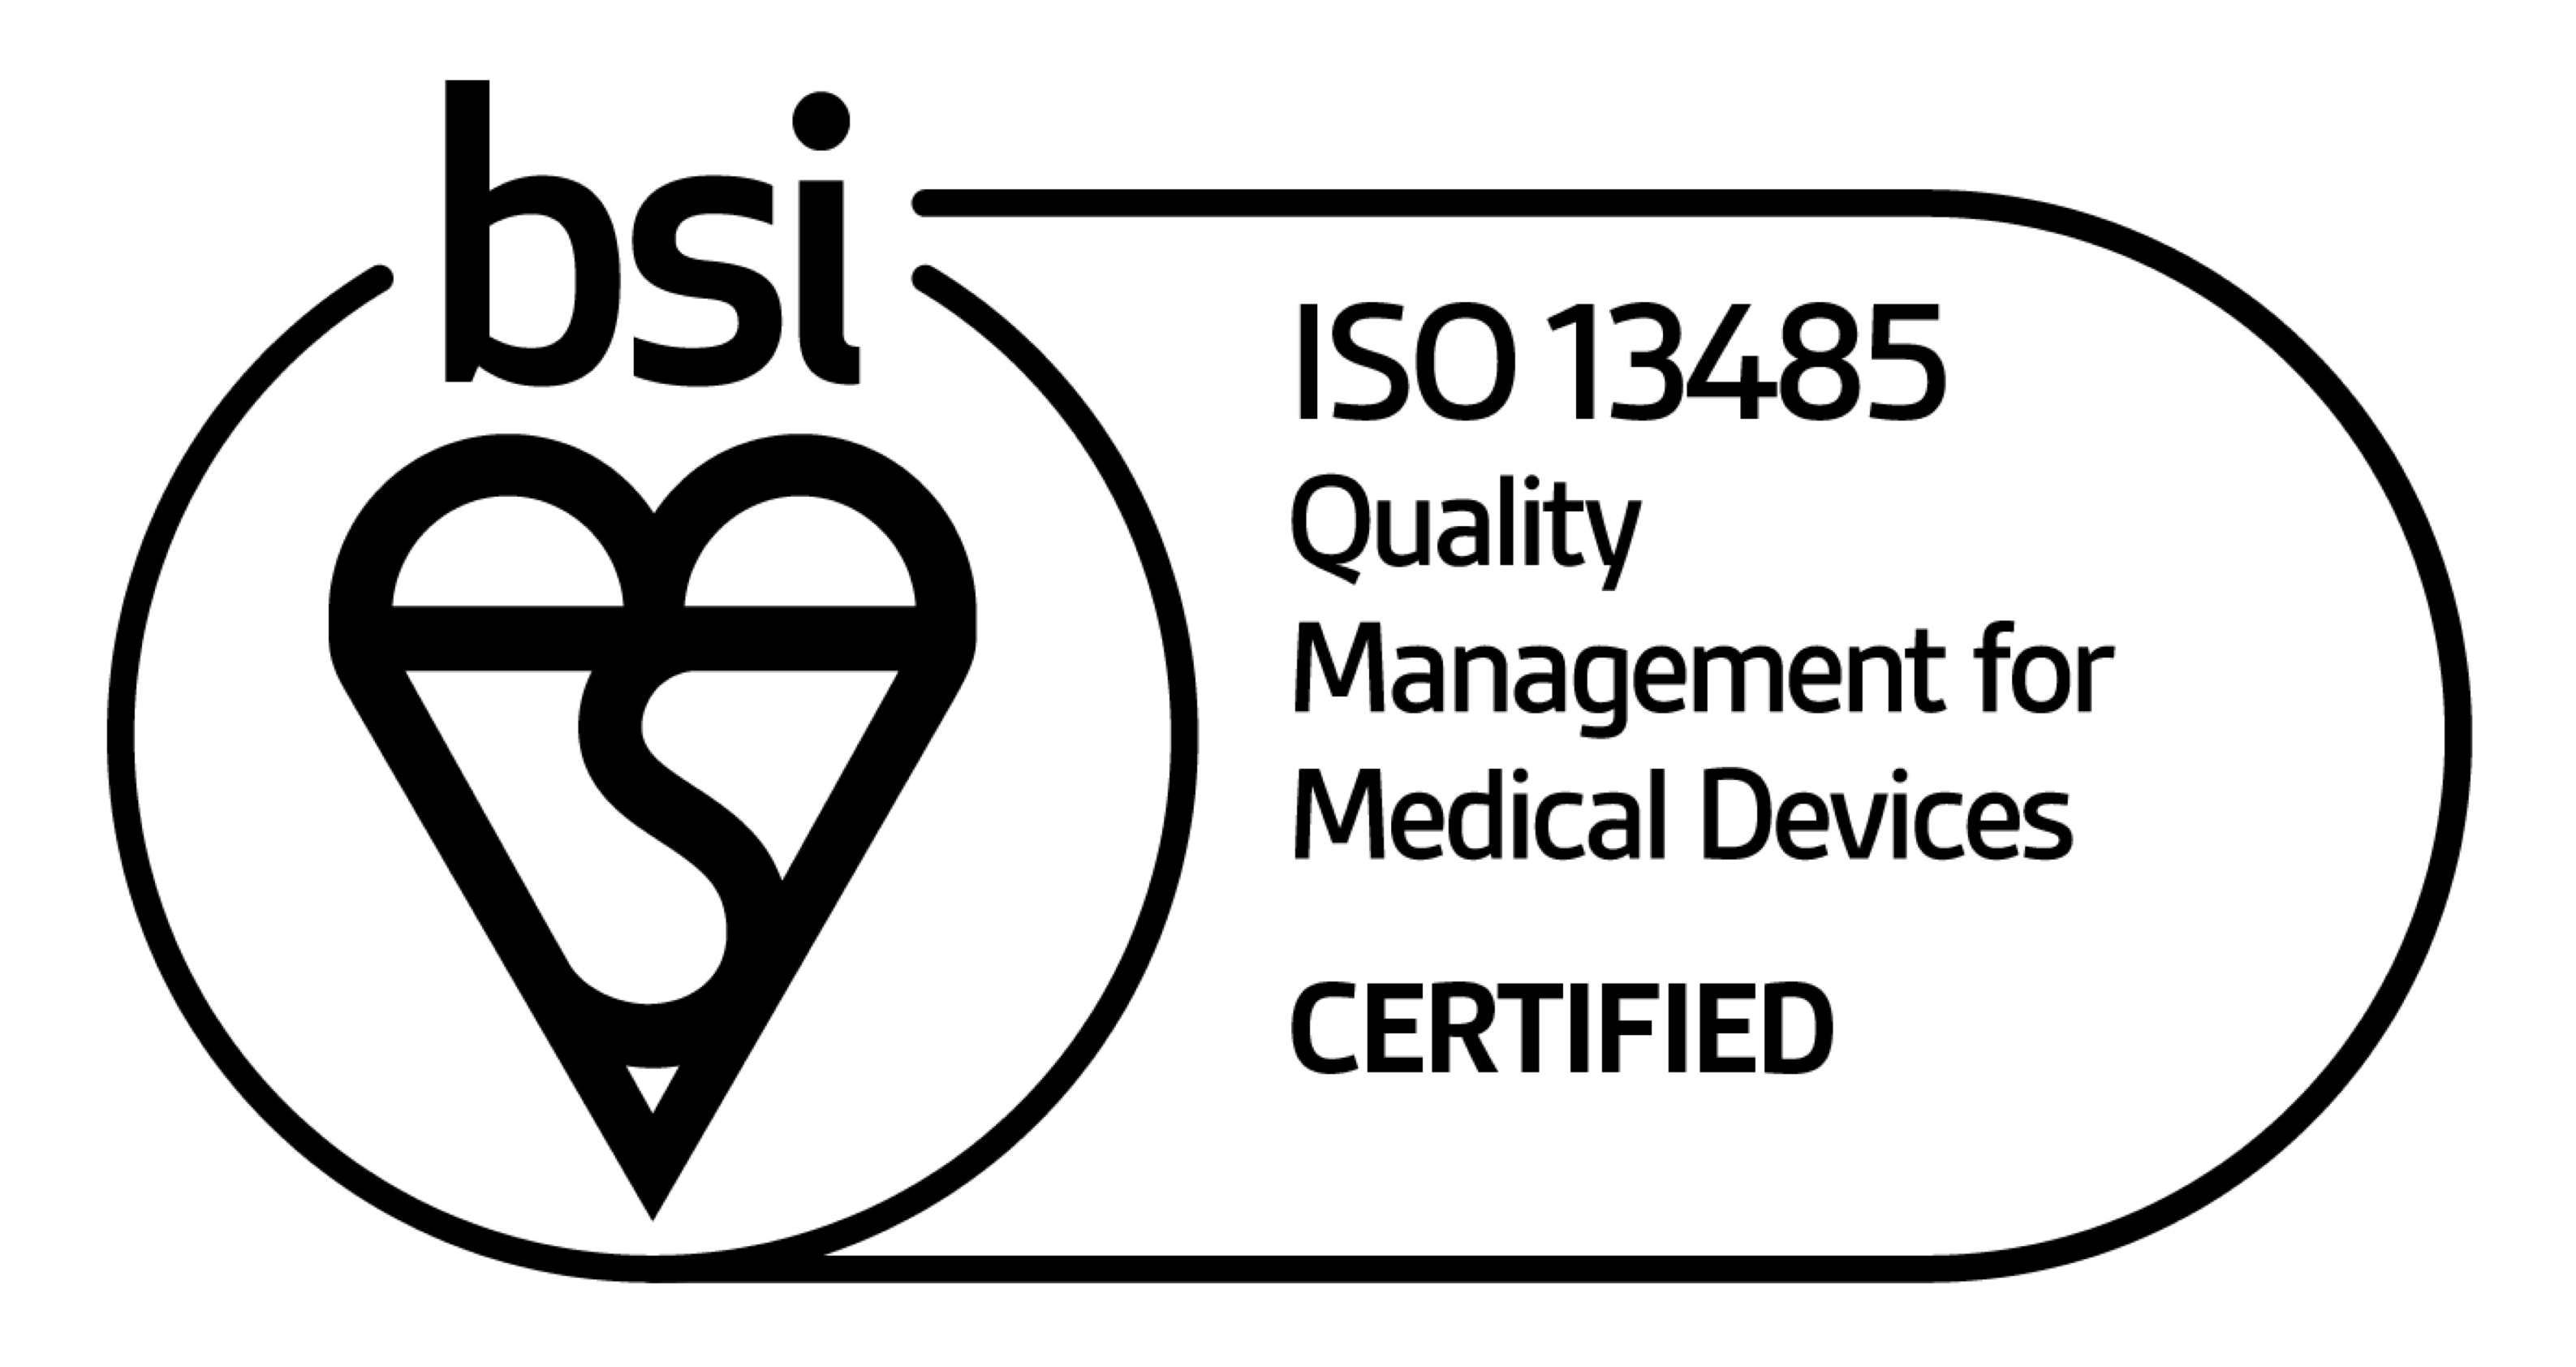 BSI ISO 13485 Medical Devices Quality Management